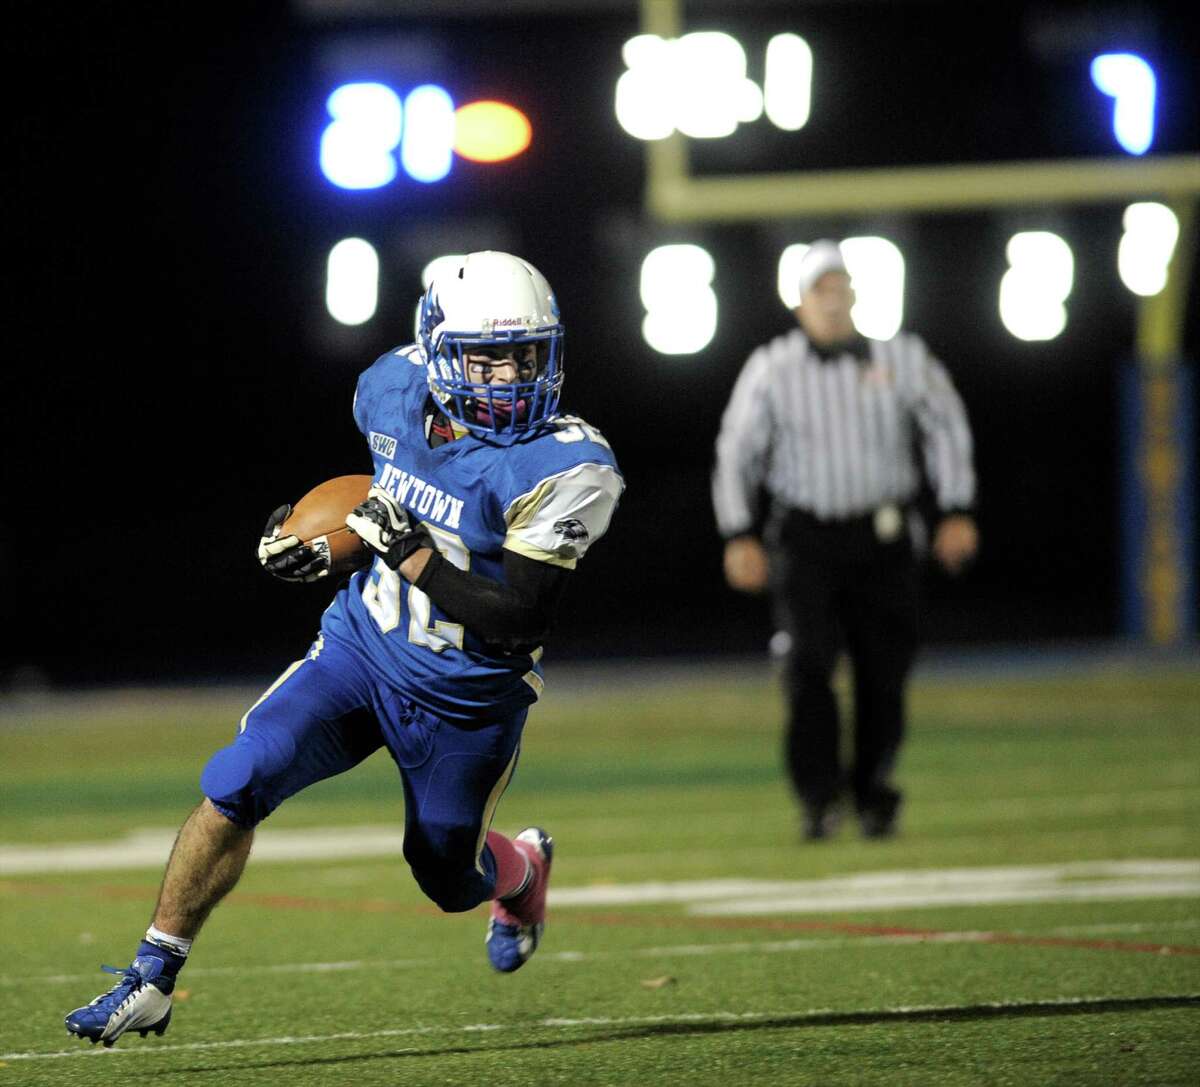 Photographs from the Brookfield at Newtown High School boys football game, Friday night, October 24, 2014, in Newtown, Conn. Newtown #32 Jaret Devellis